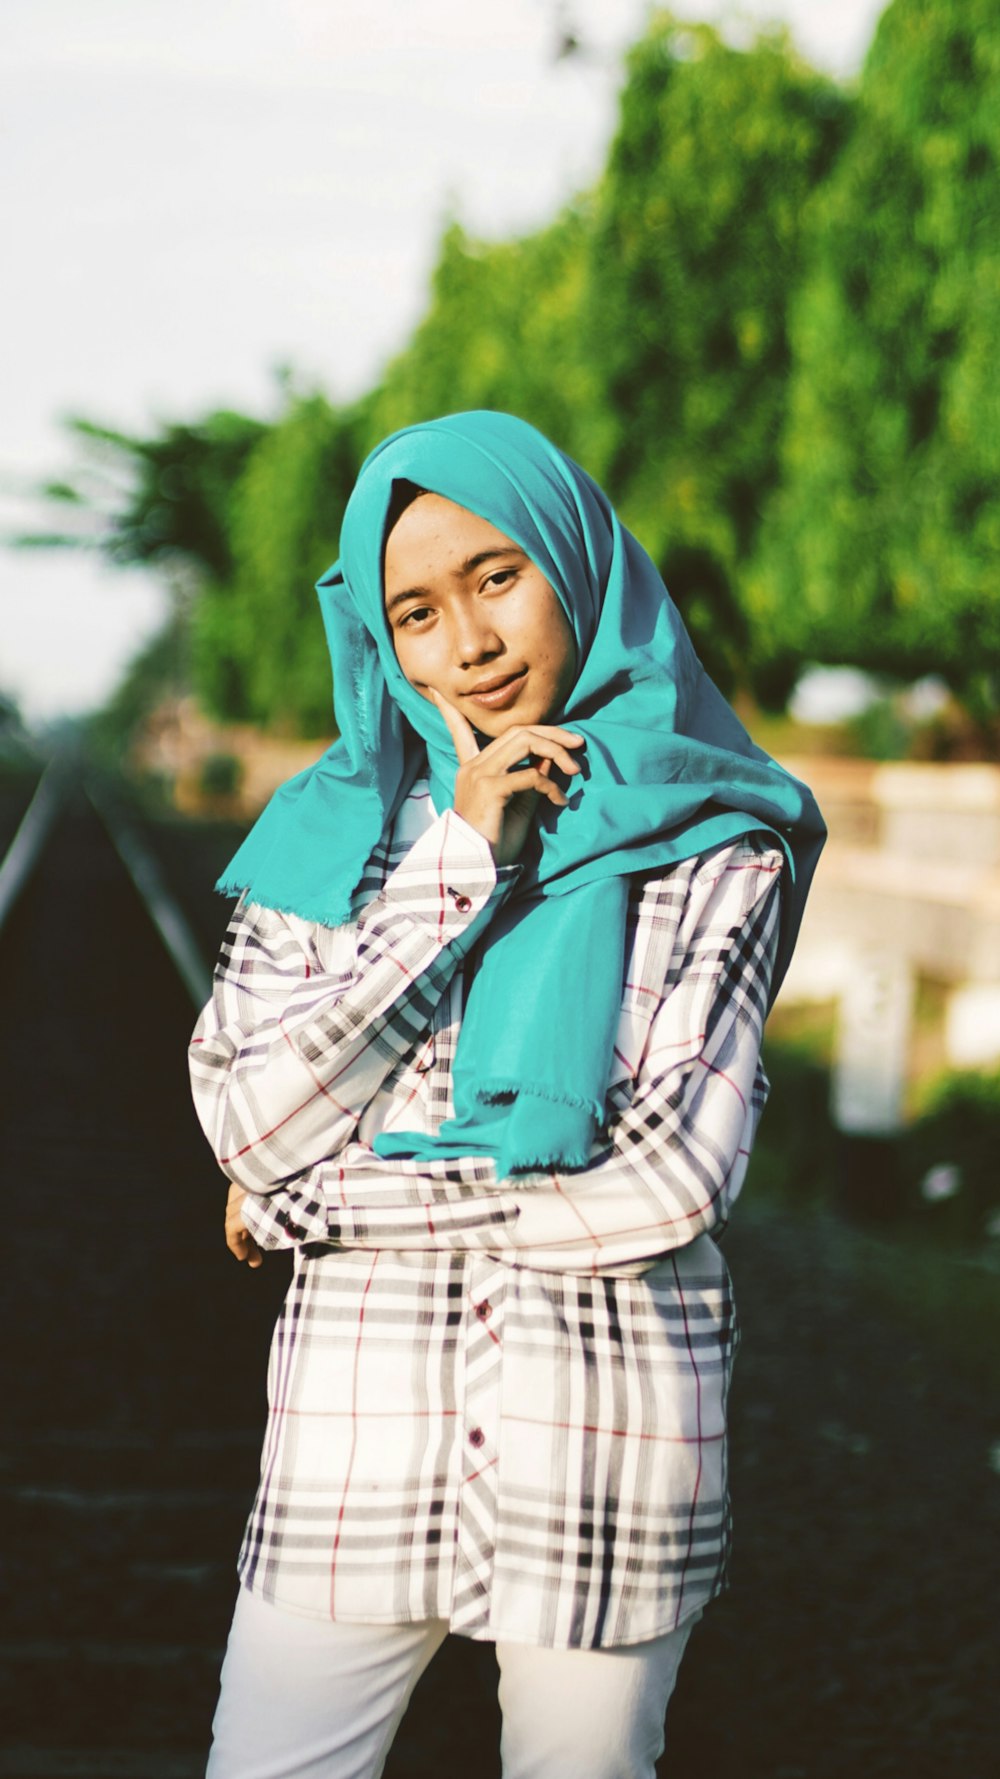 woman in blue hijab headscarf standing near green tree in selective focus photography